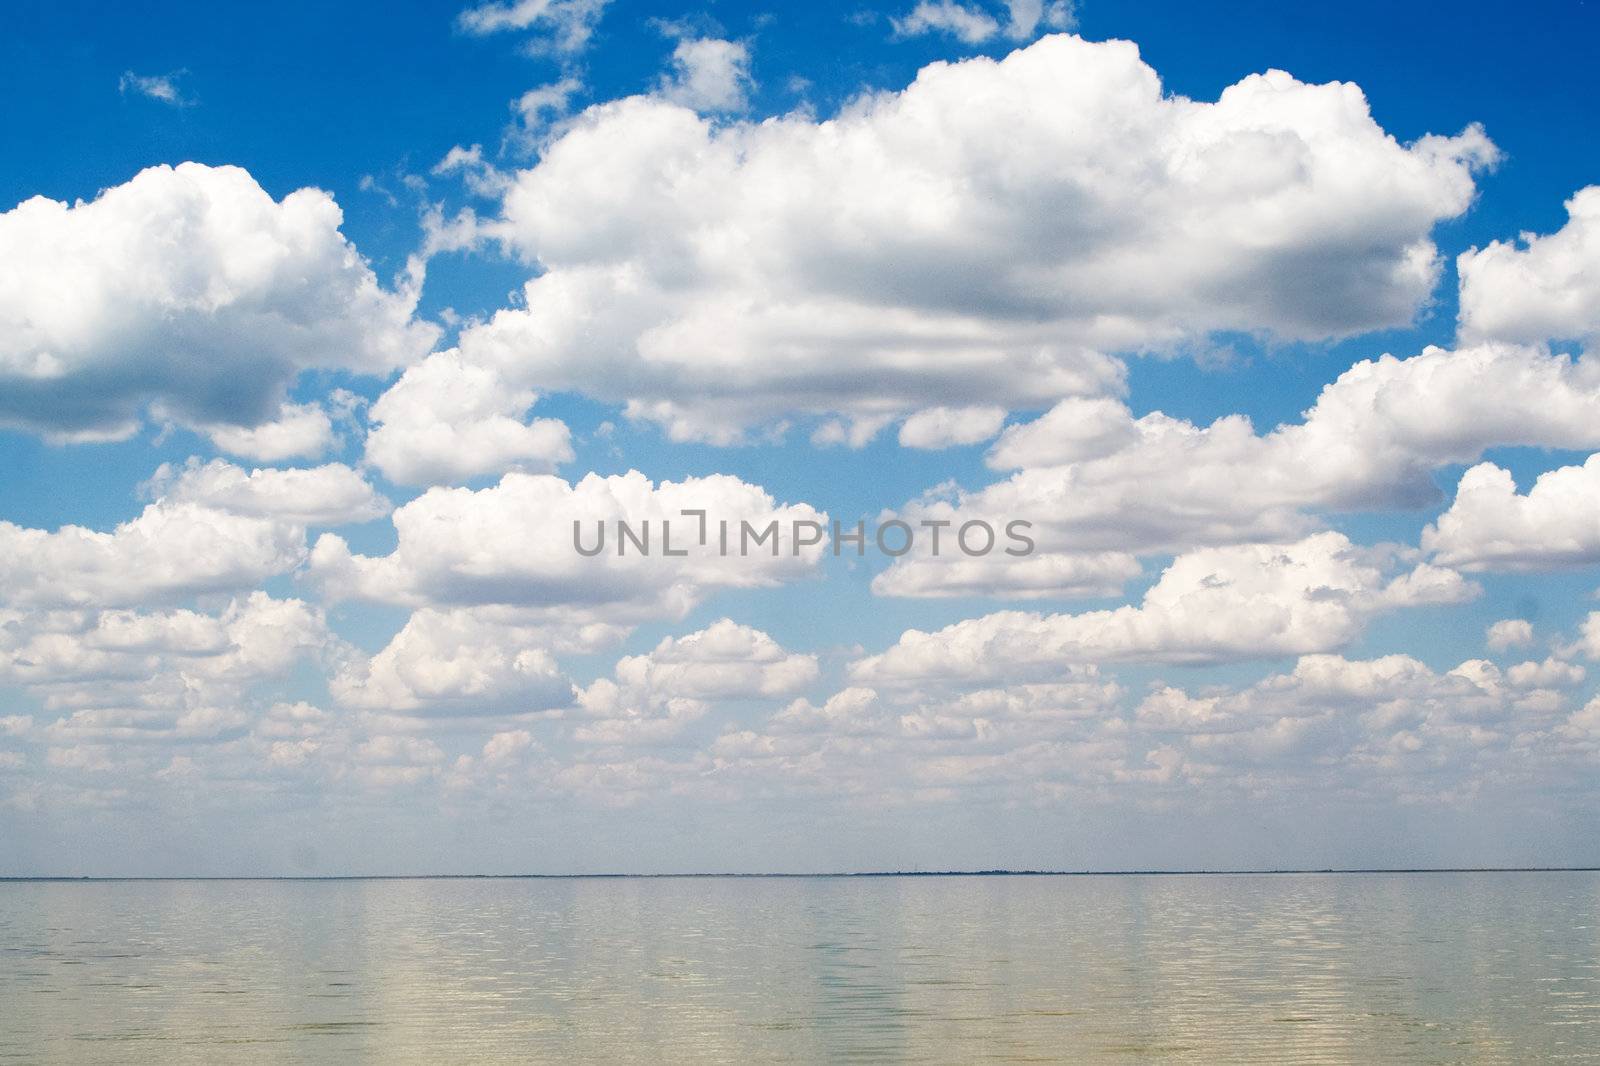 The blue sky and clouds over a bay